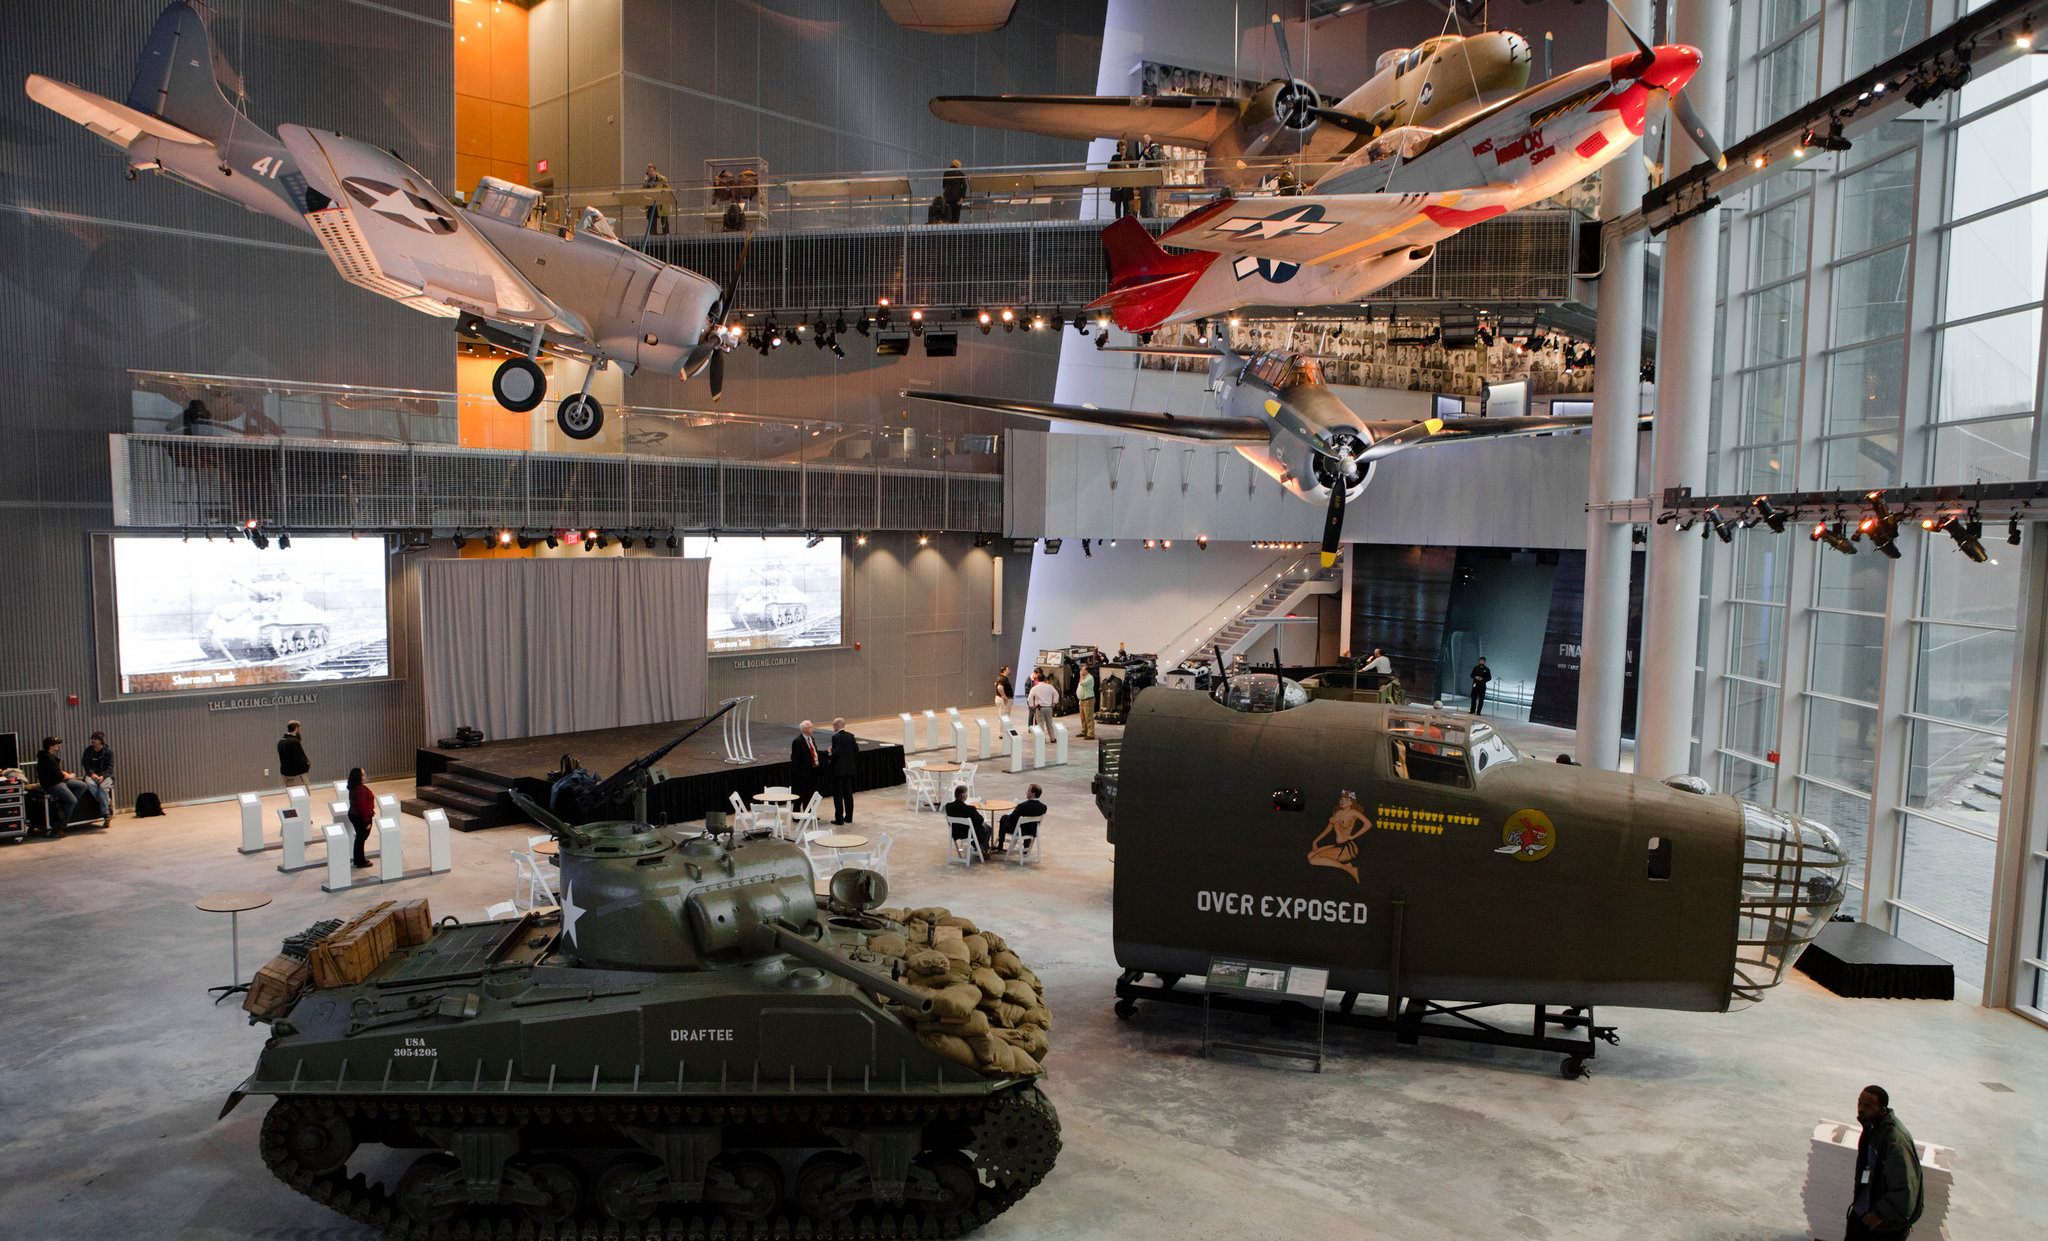 The National WWII Museum – New Orleans, La